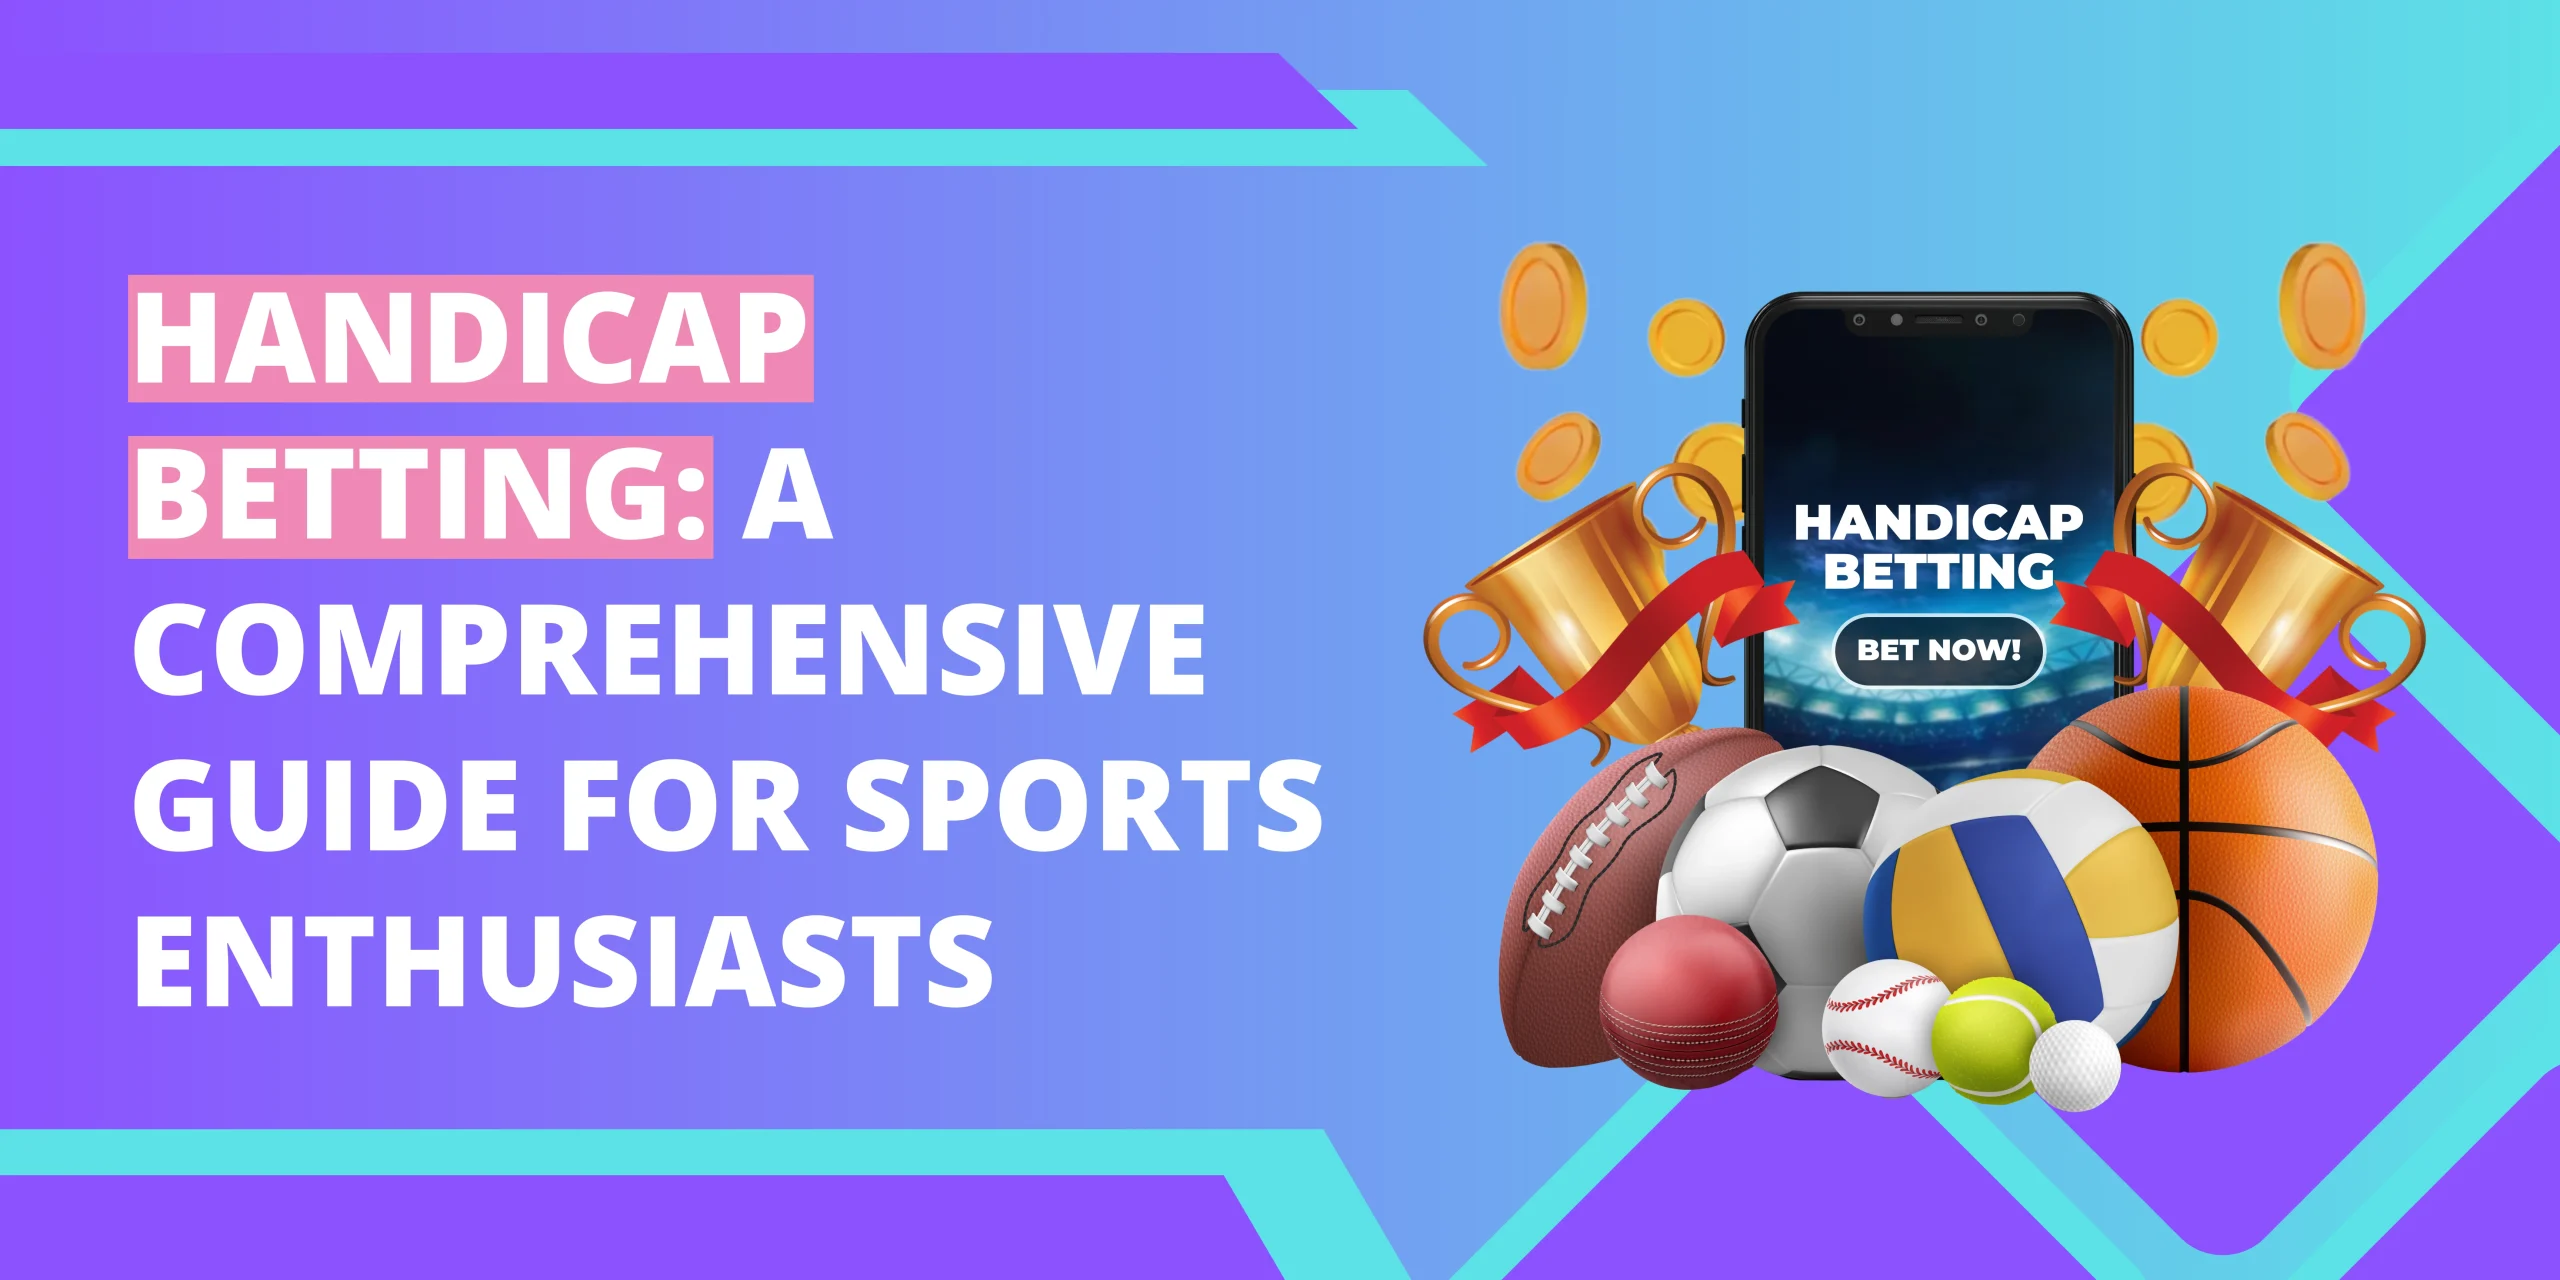 Handicap Betting: A Comprehensive Guide for Sports Enthusiasts